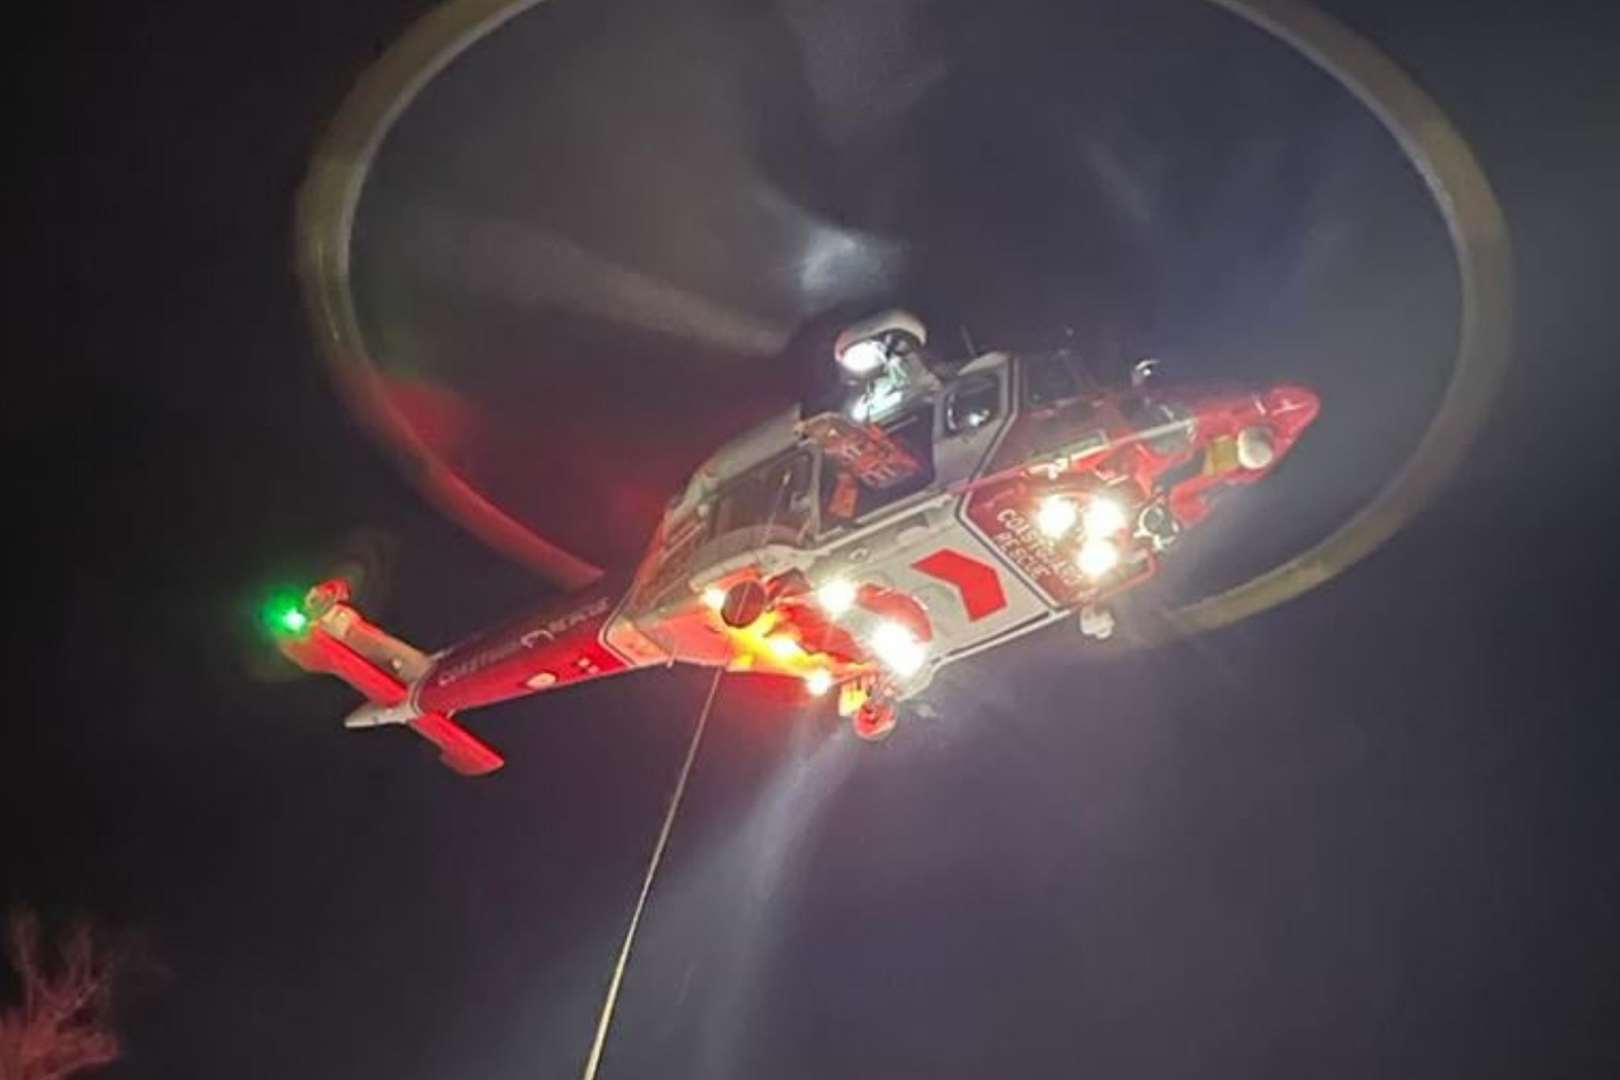 The coastguard helicopter will be running training exercises for the next fortnight